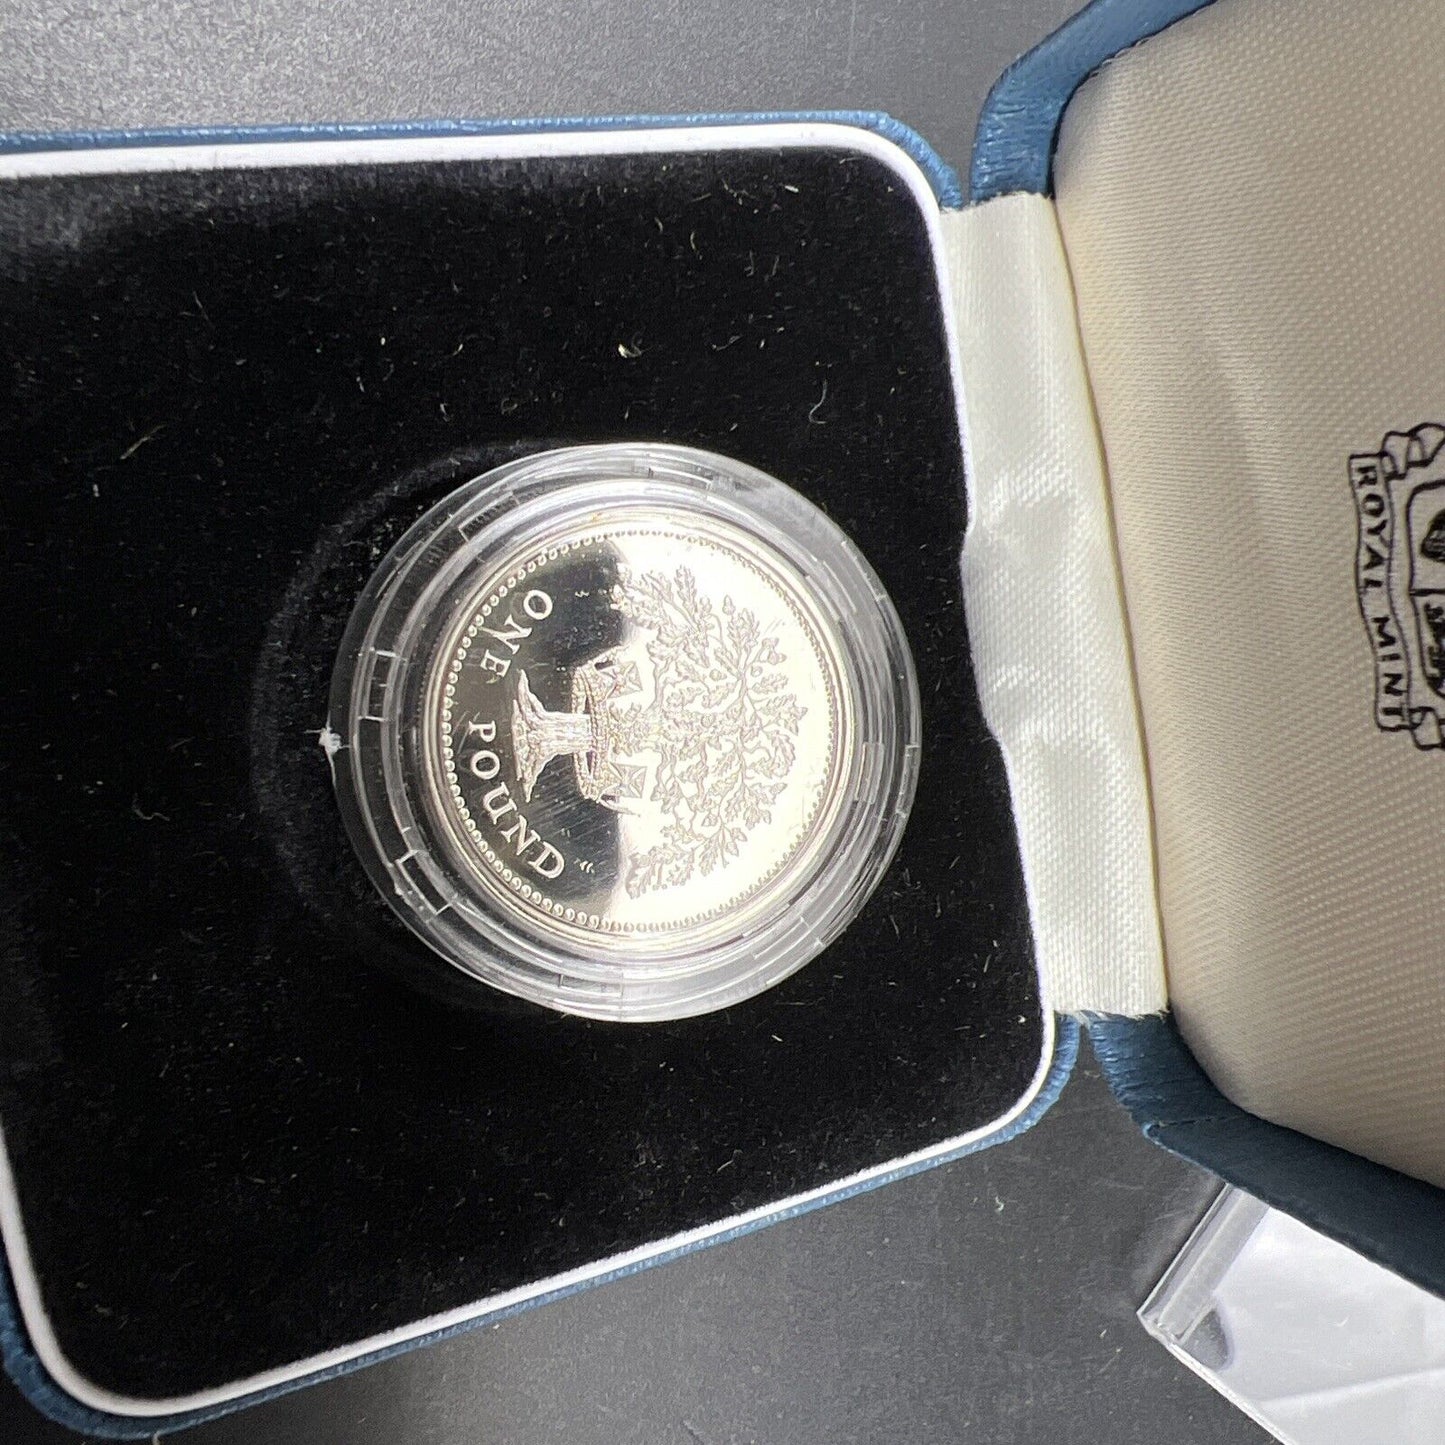 1987 UK Sterling Silver Proof One Pound Coin w/ Box & COA